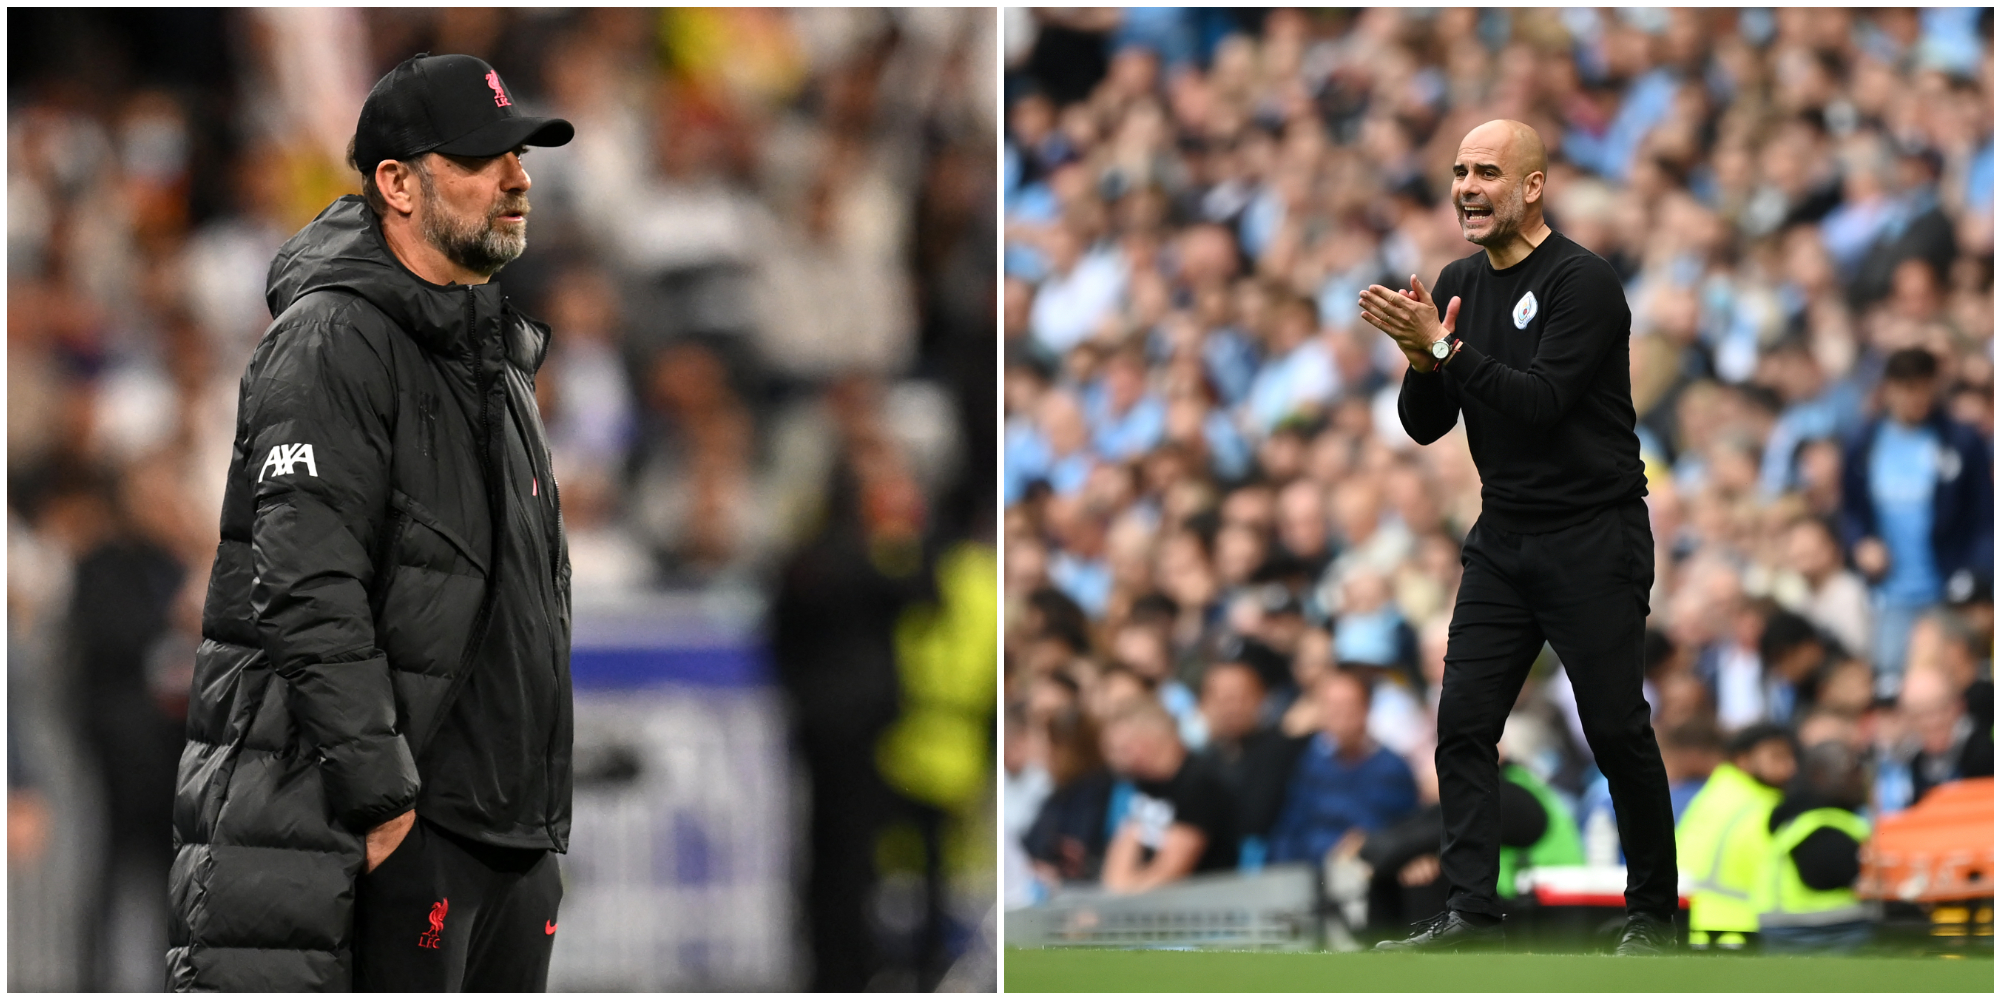 Liverpool & Manchester City set to share big challenge next season they’ll need to ‘adapt’ to, claims ex-PL star